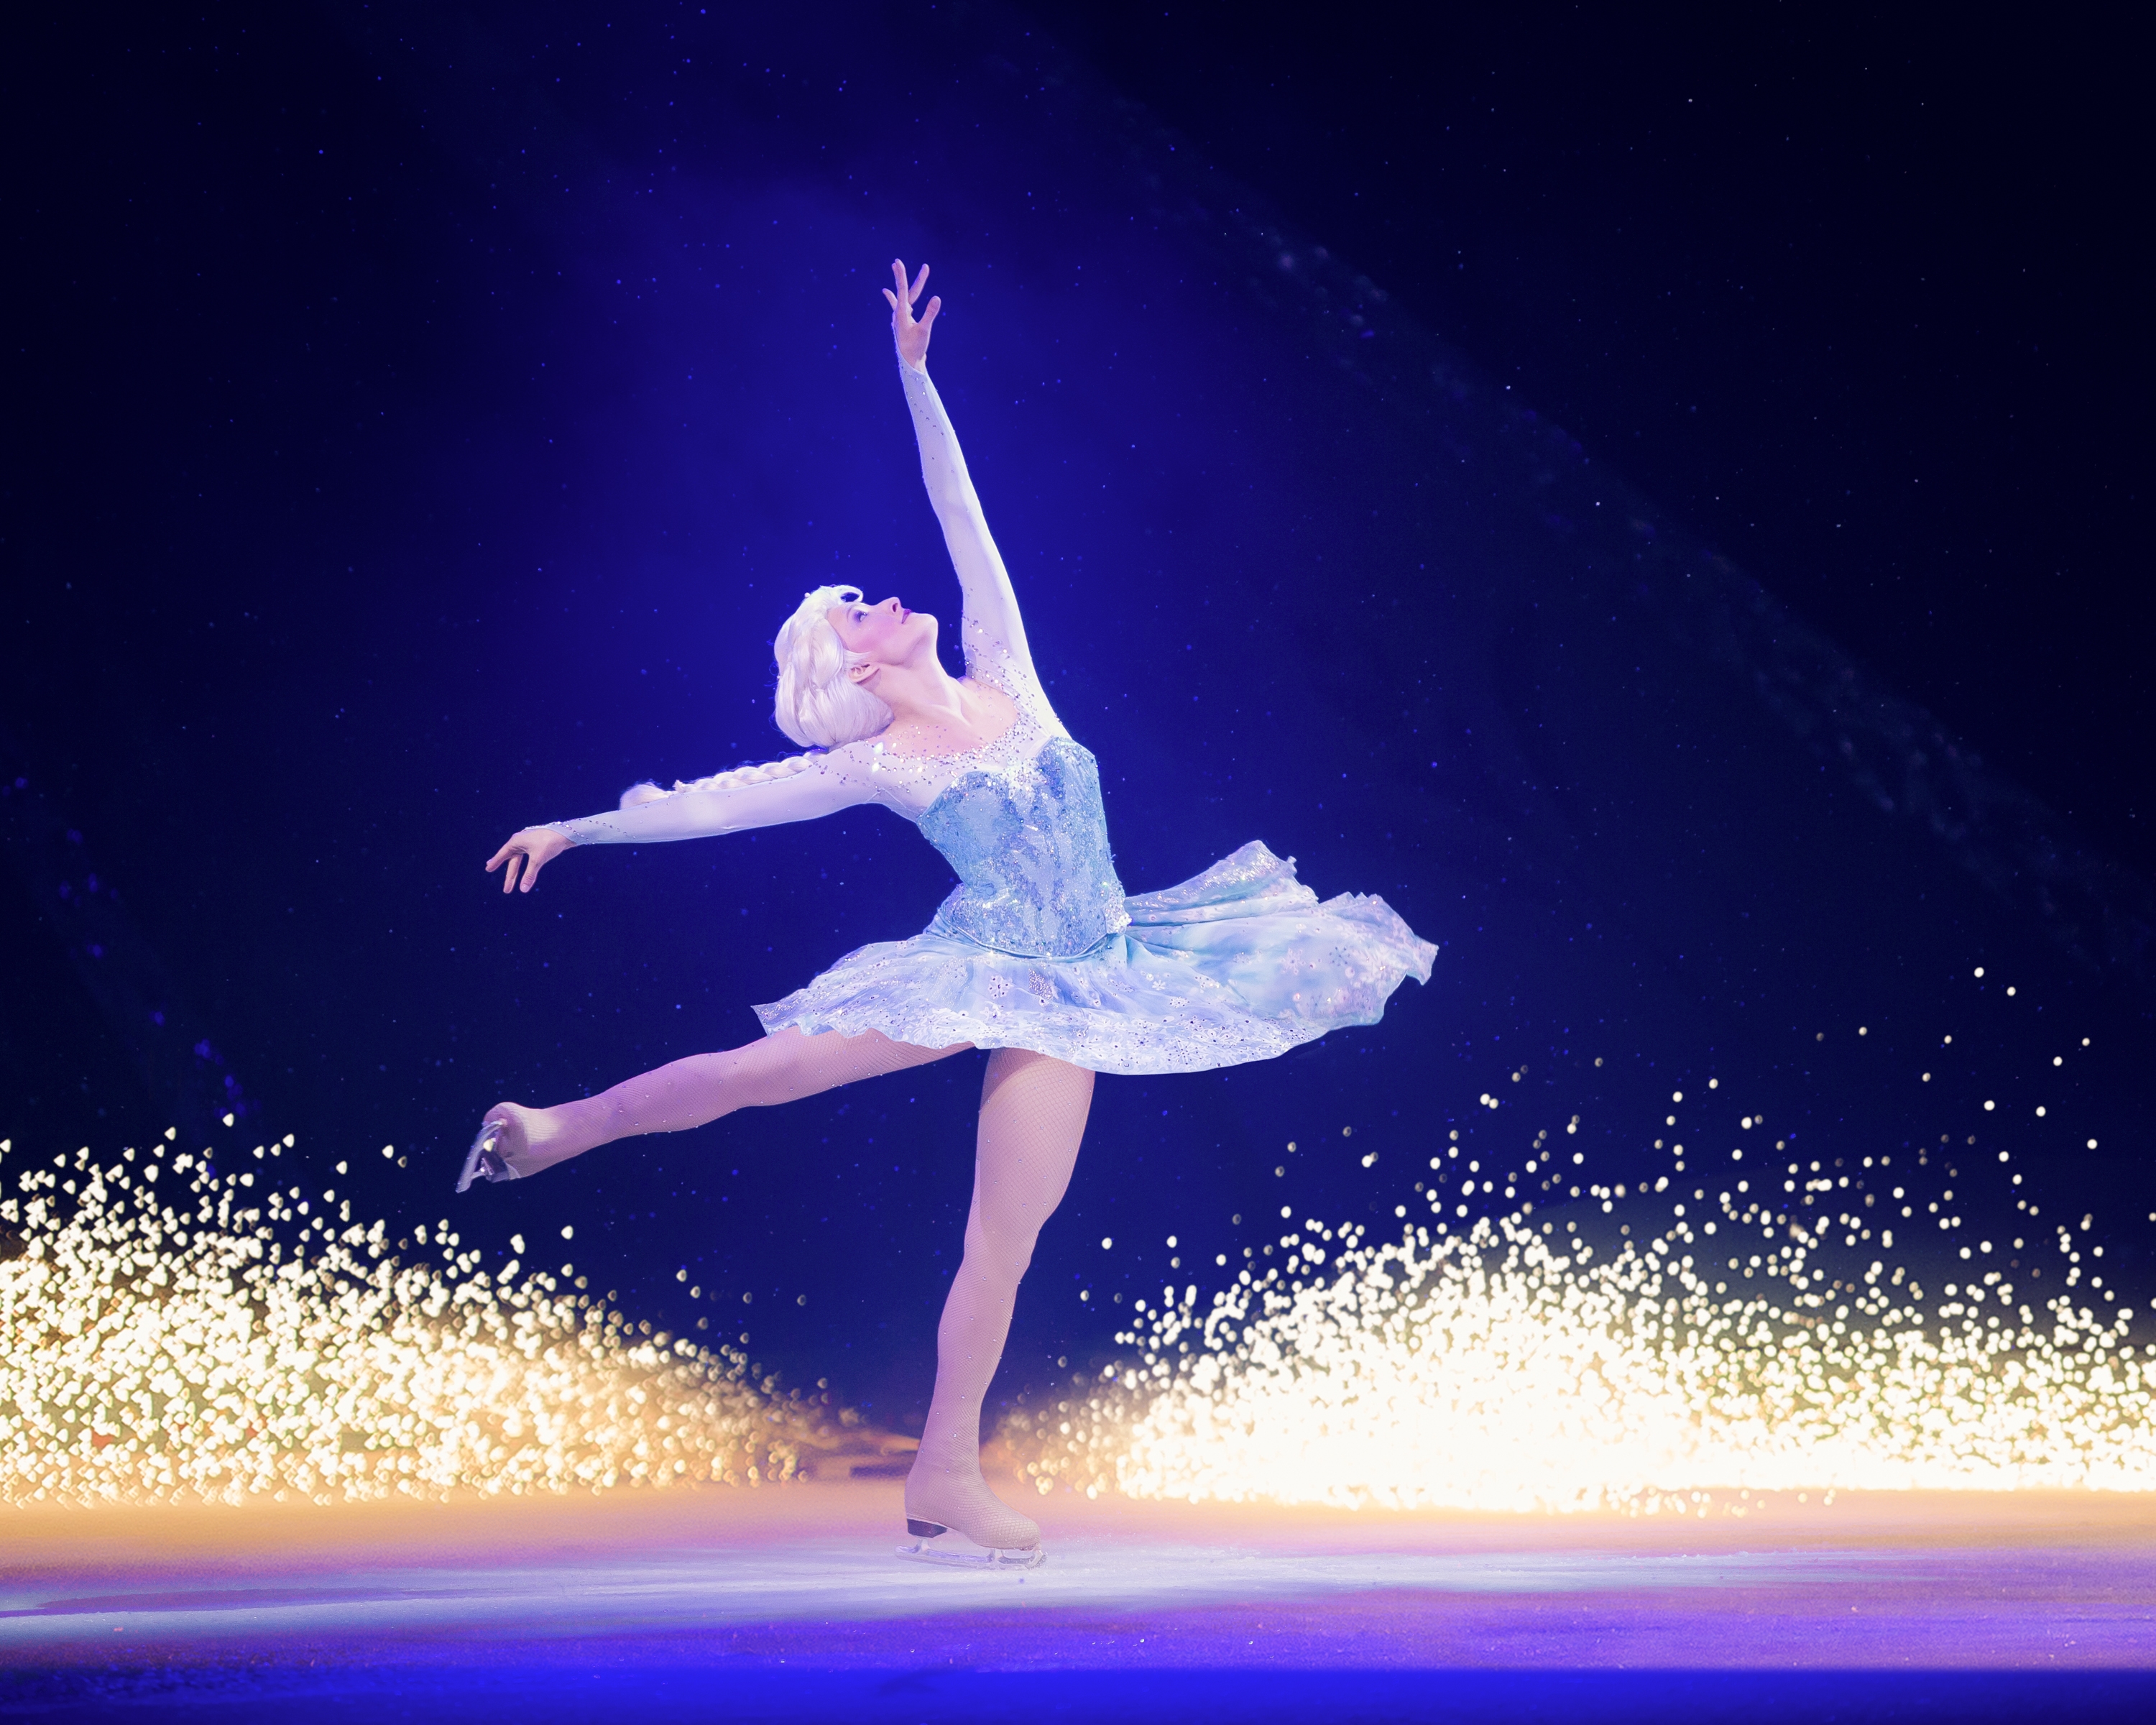 TIME FOR A GIVEAWAY: Win a 4 Pack of Disney on Ice Frozen Tickets!